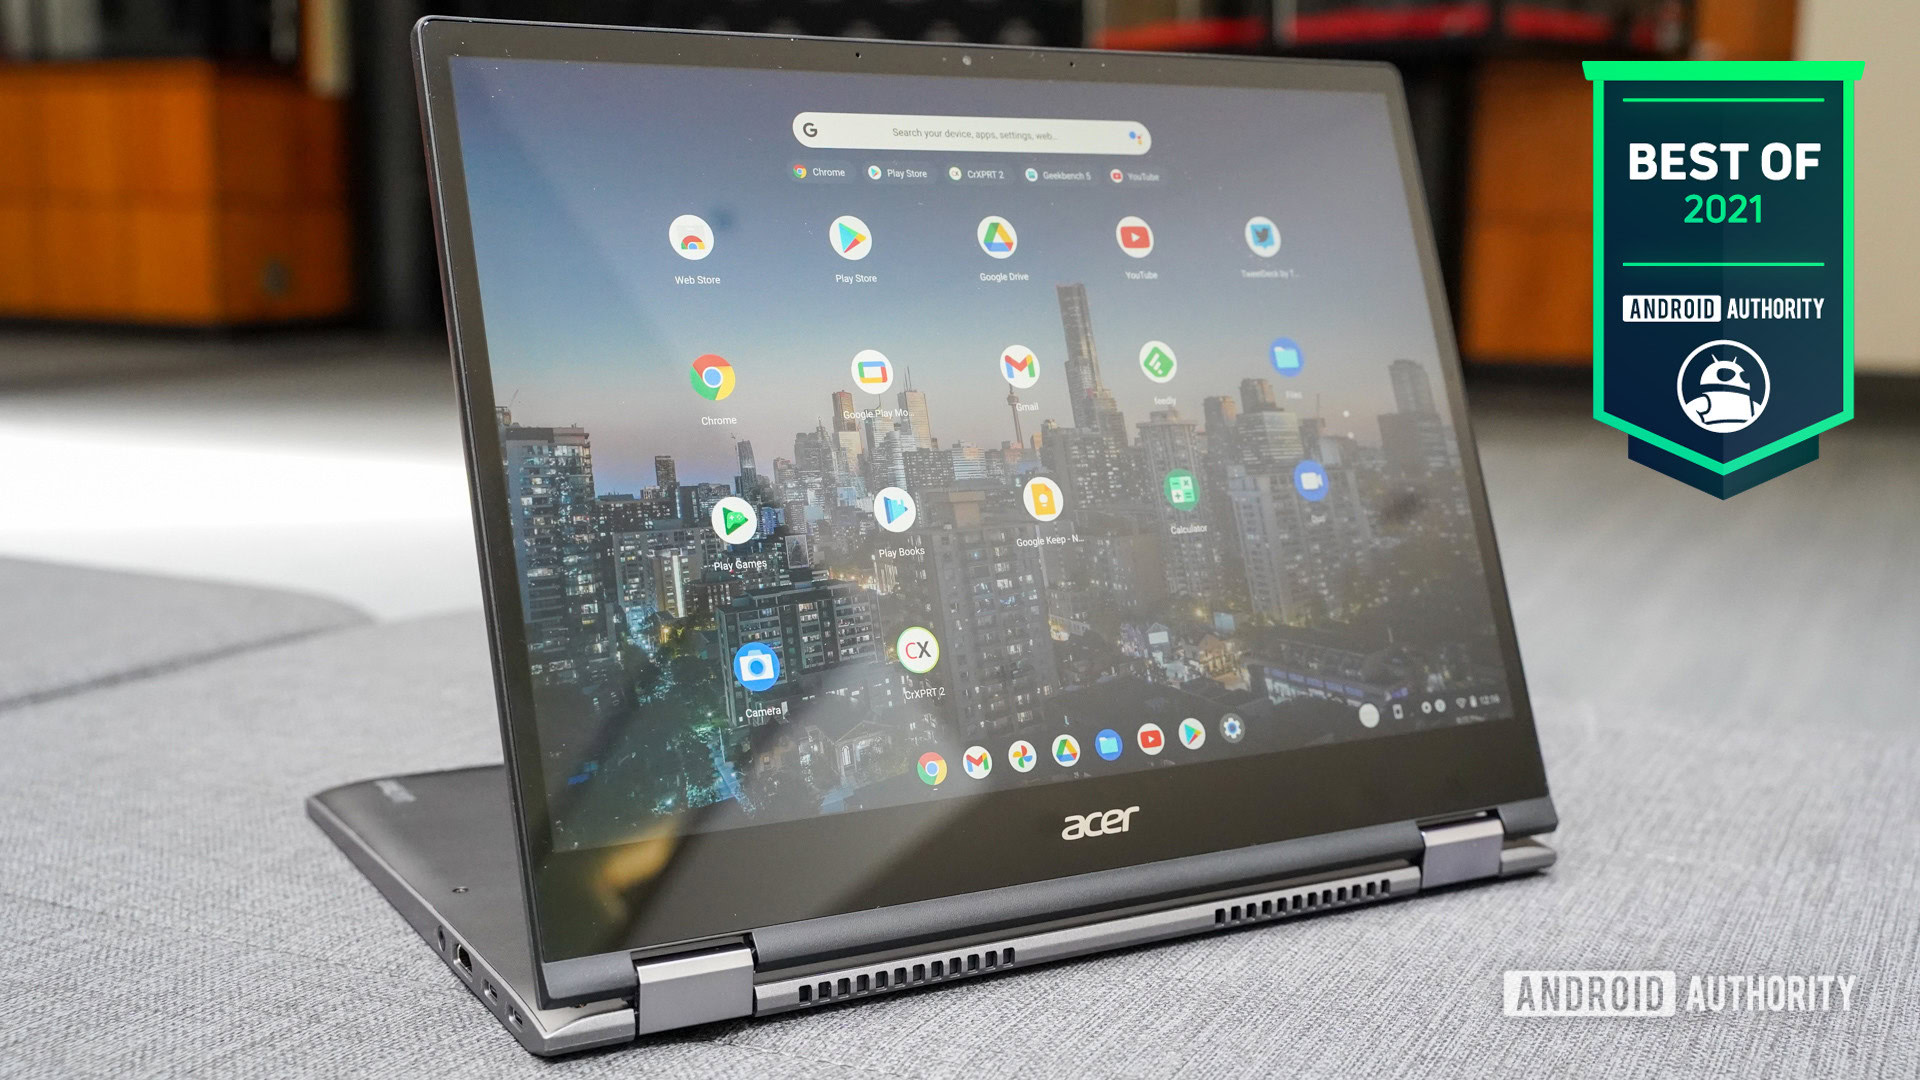 Acer Chromebook Spin 713 Android Authority Best of 2021 badge